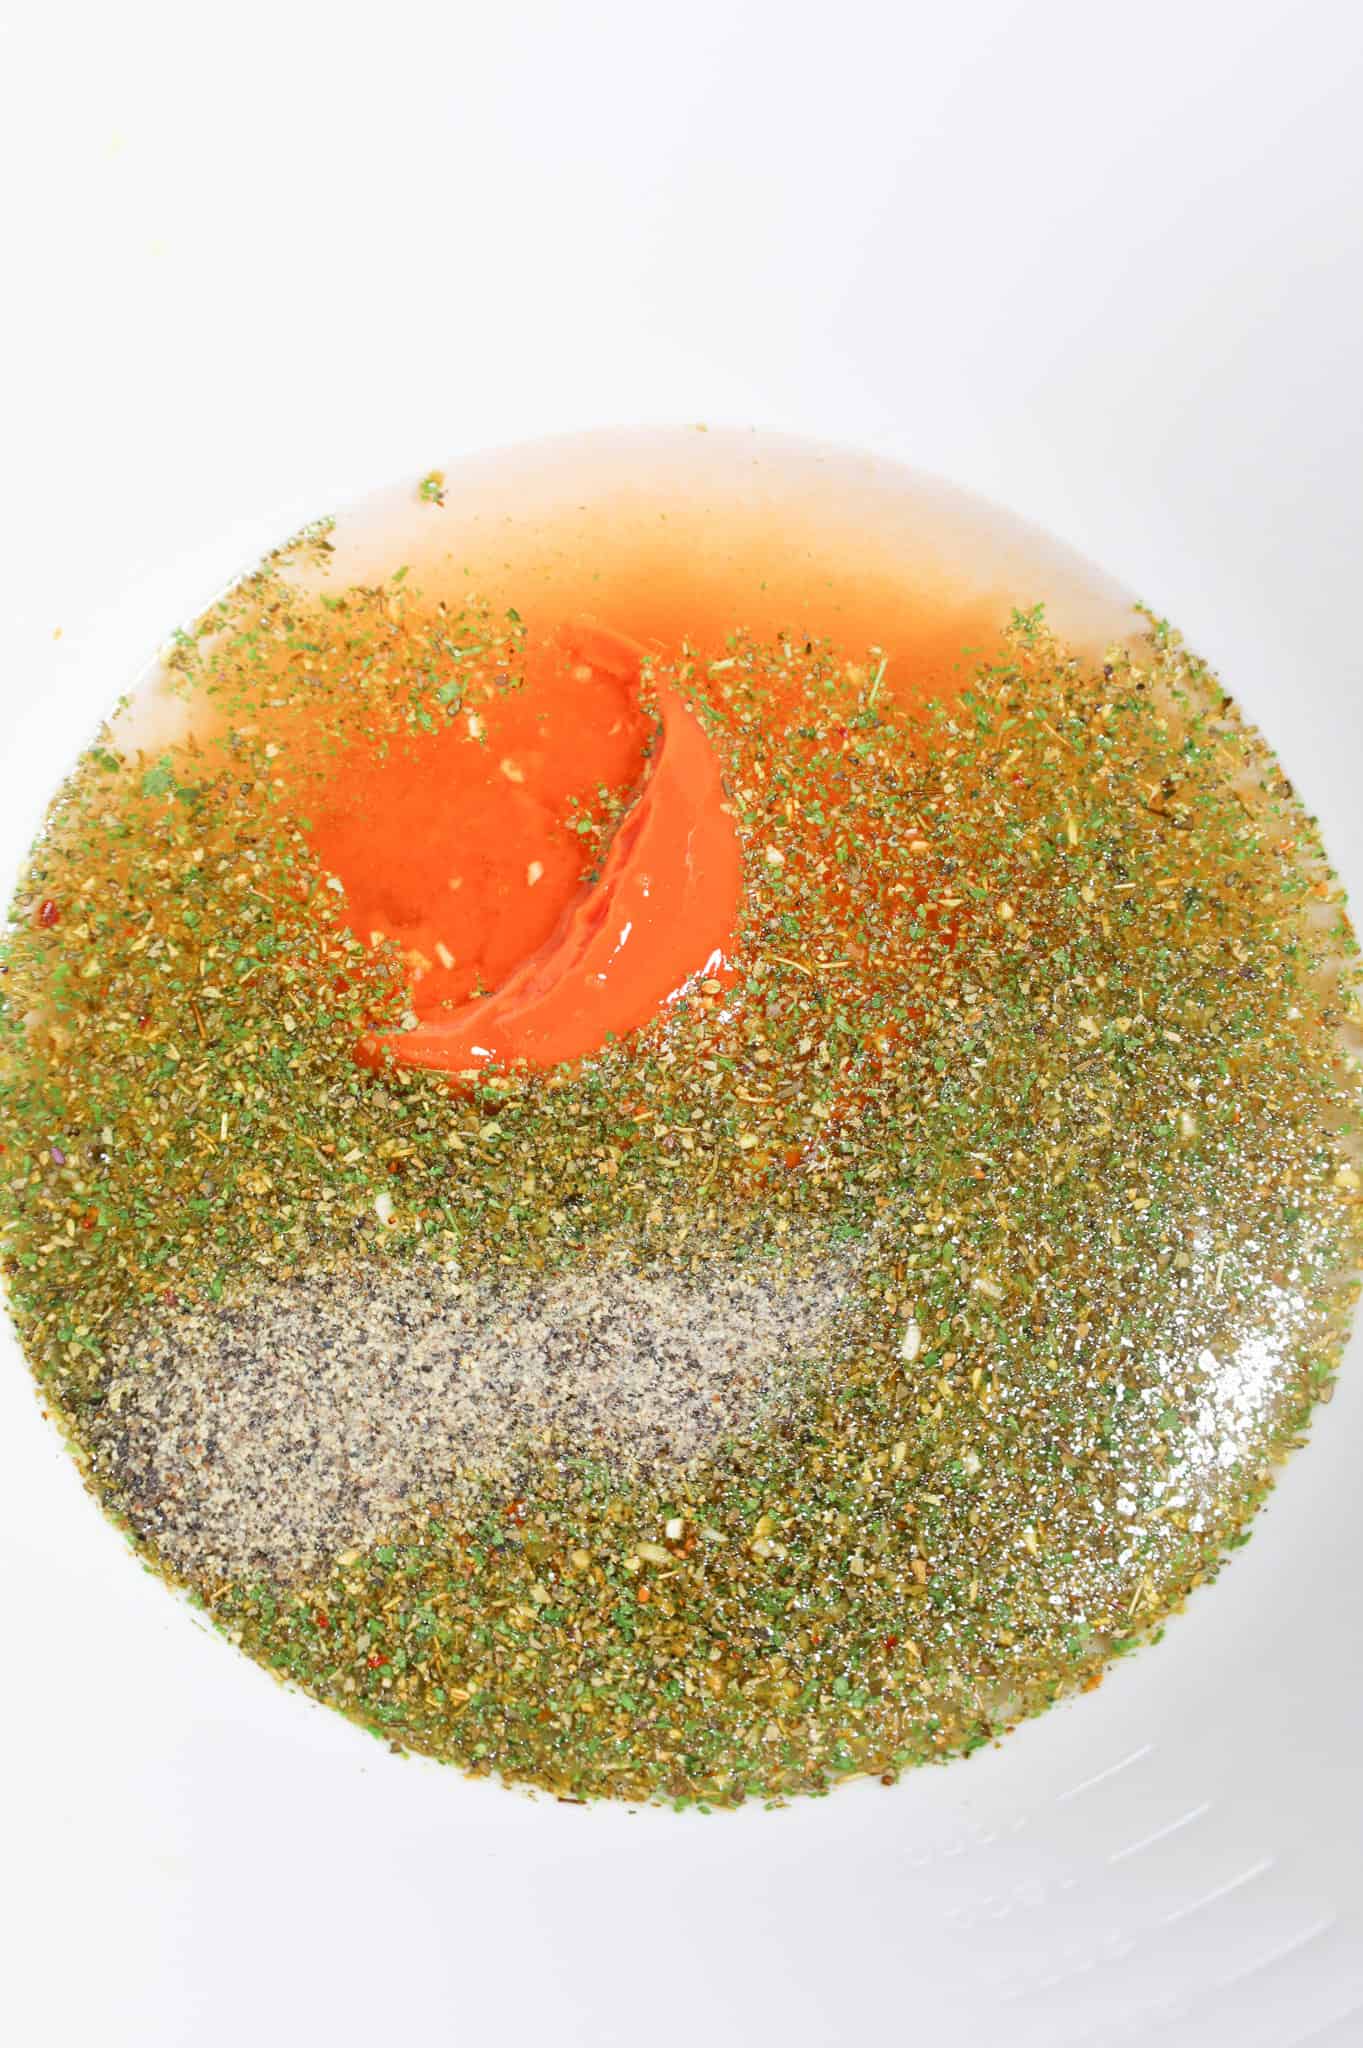 Italian seasoning, water and condensed tomato soup in a mixing bowl